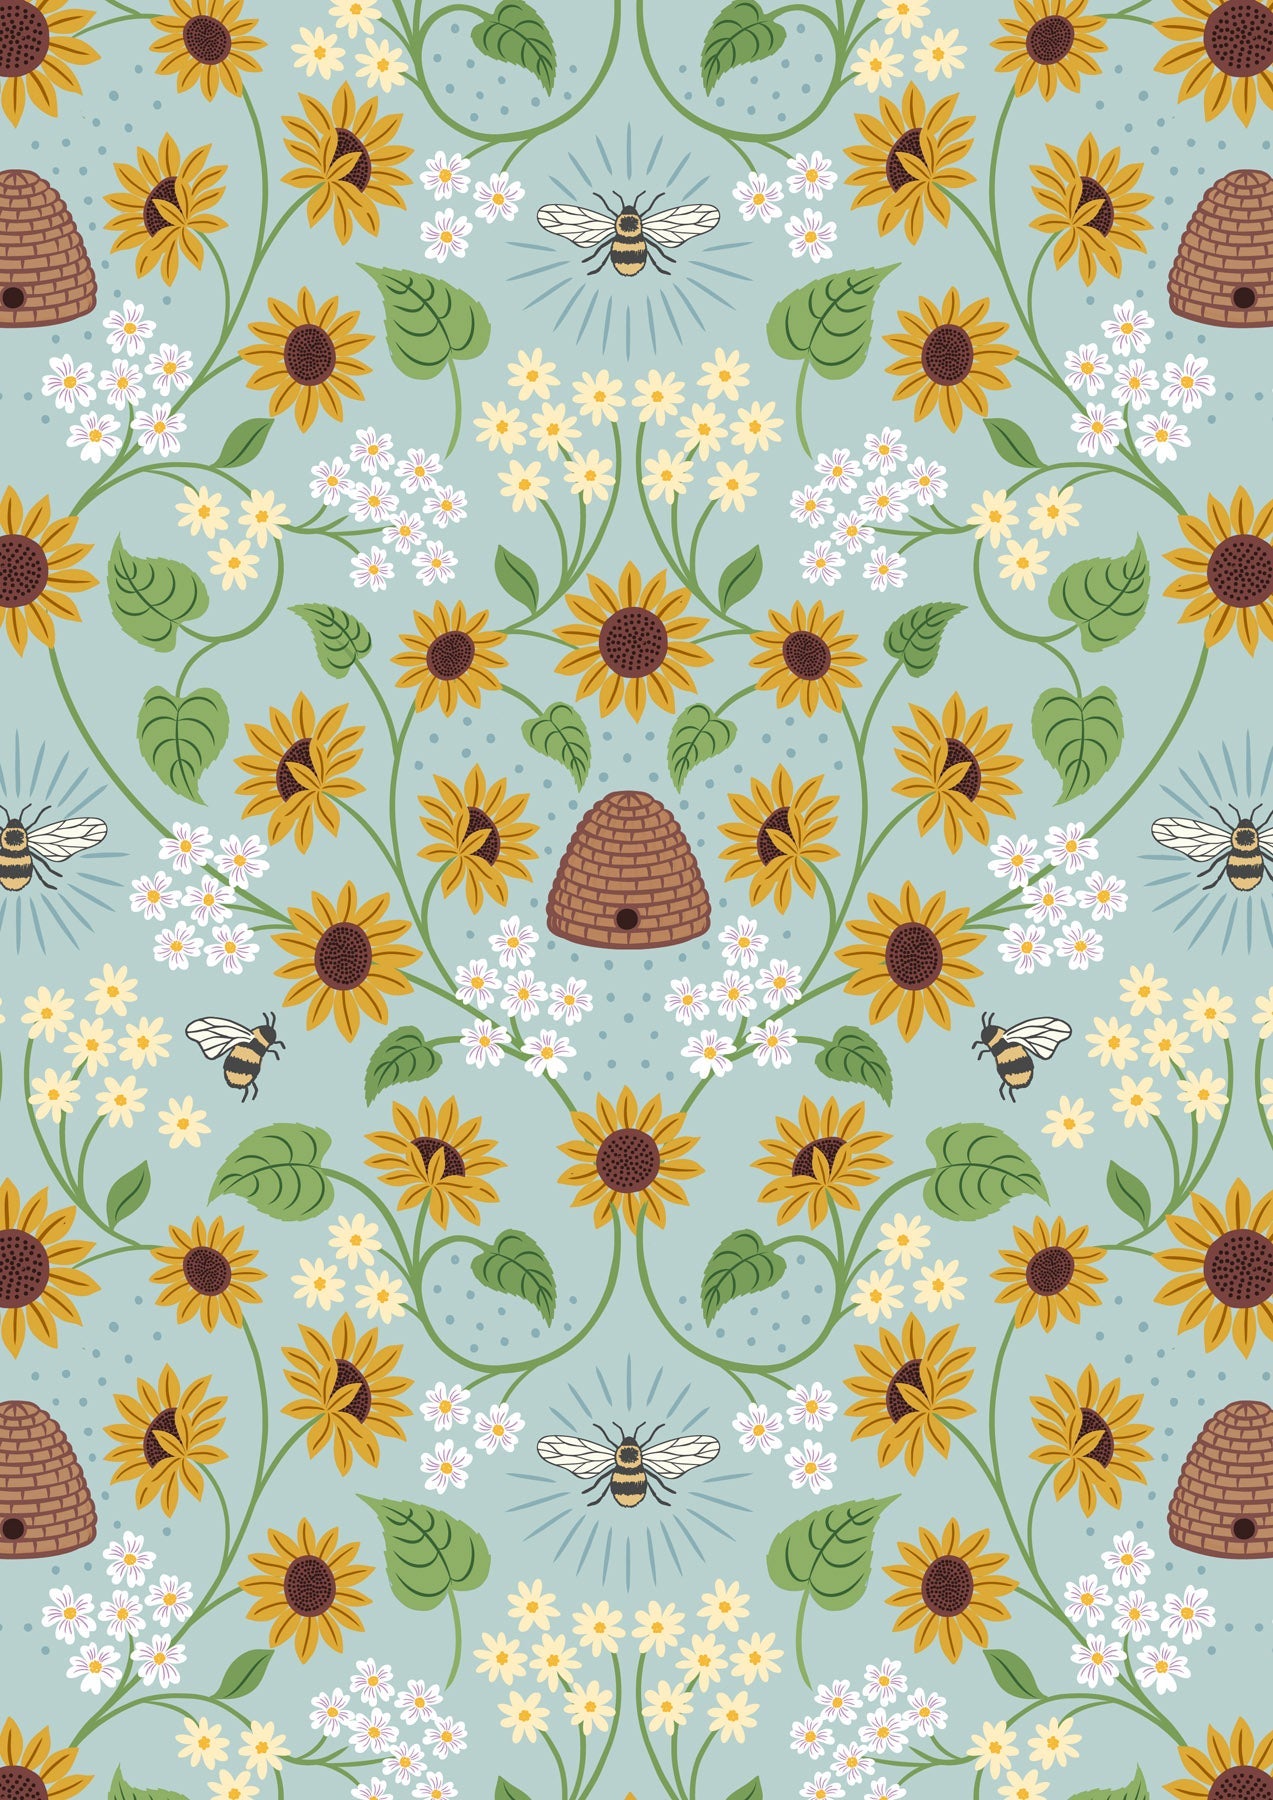 Image of 6747-2 Sunflowers - Bee Hive on Pale Blue Bolt